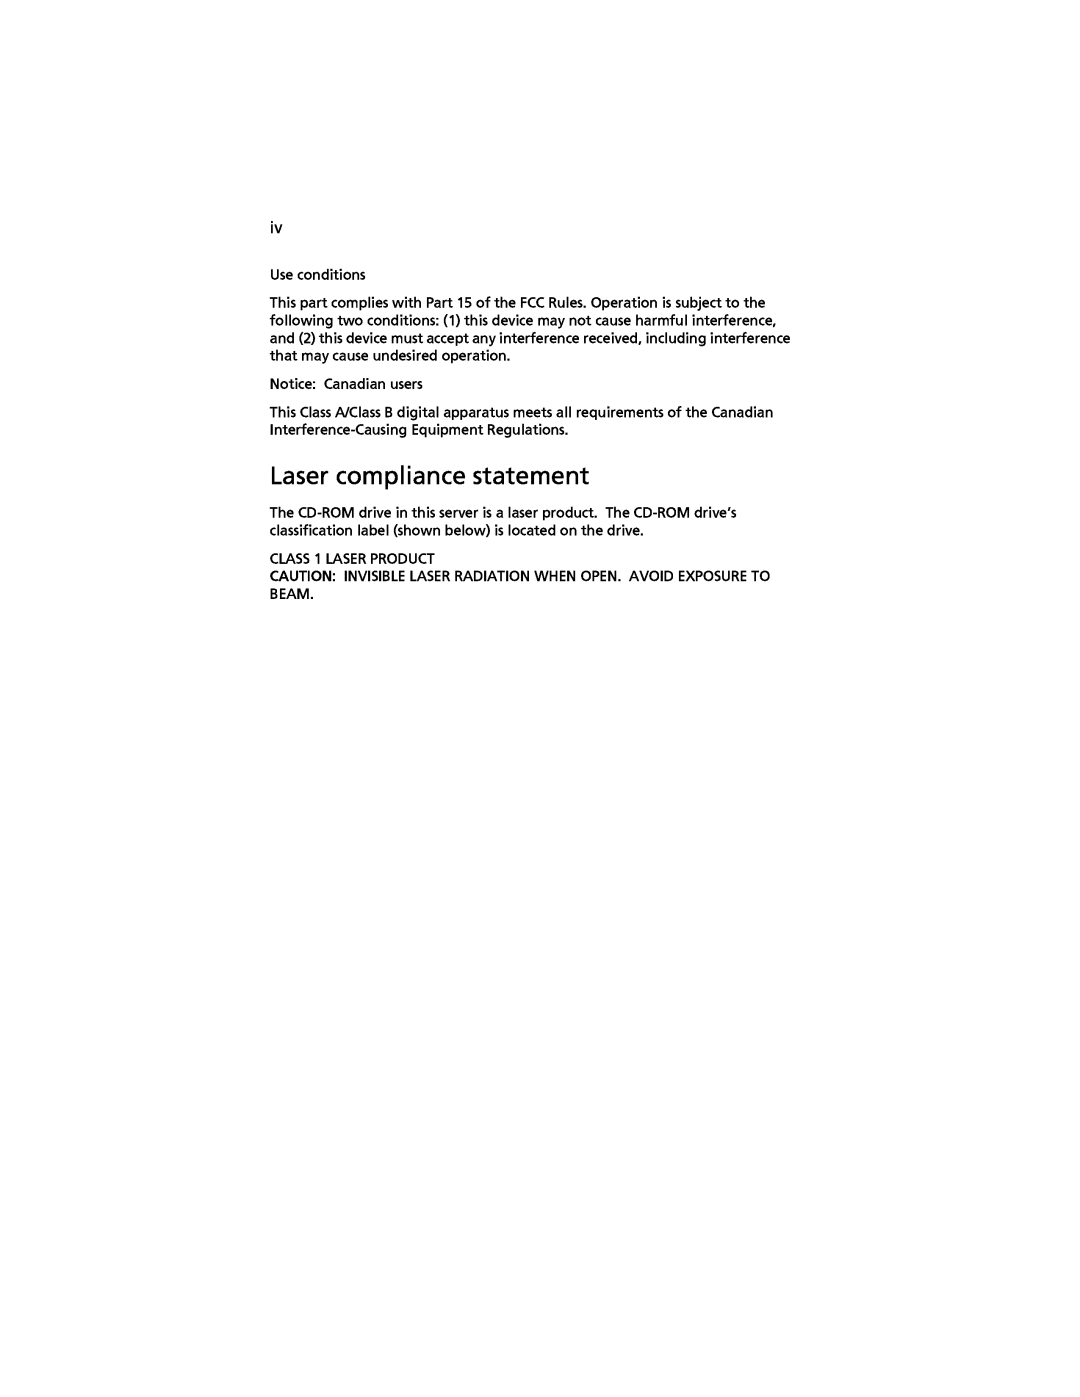 Acer G520 series manual Laser compliance statement 